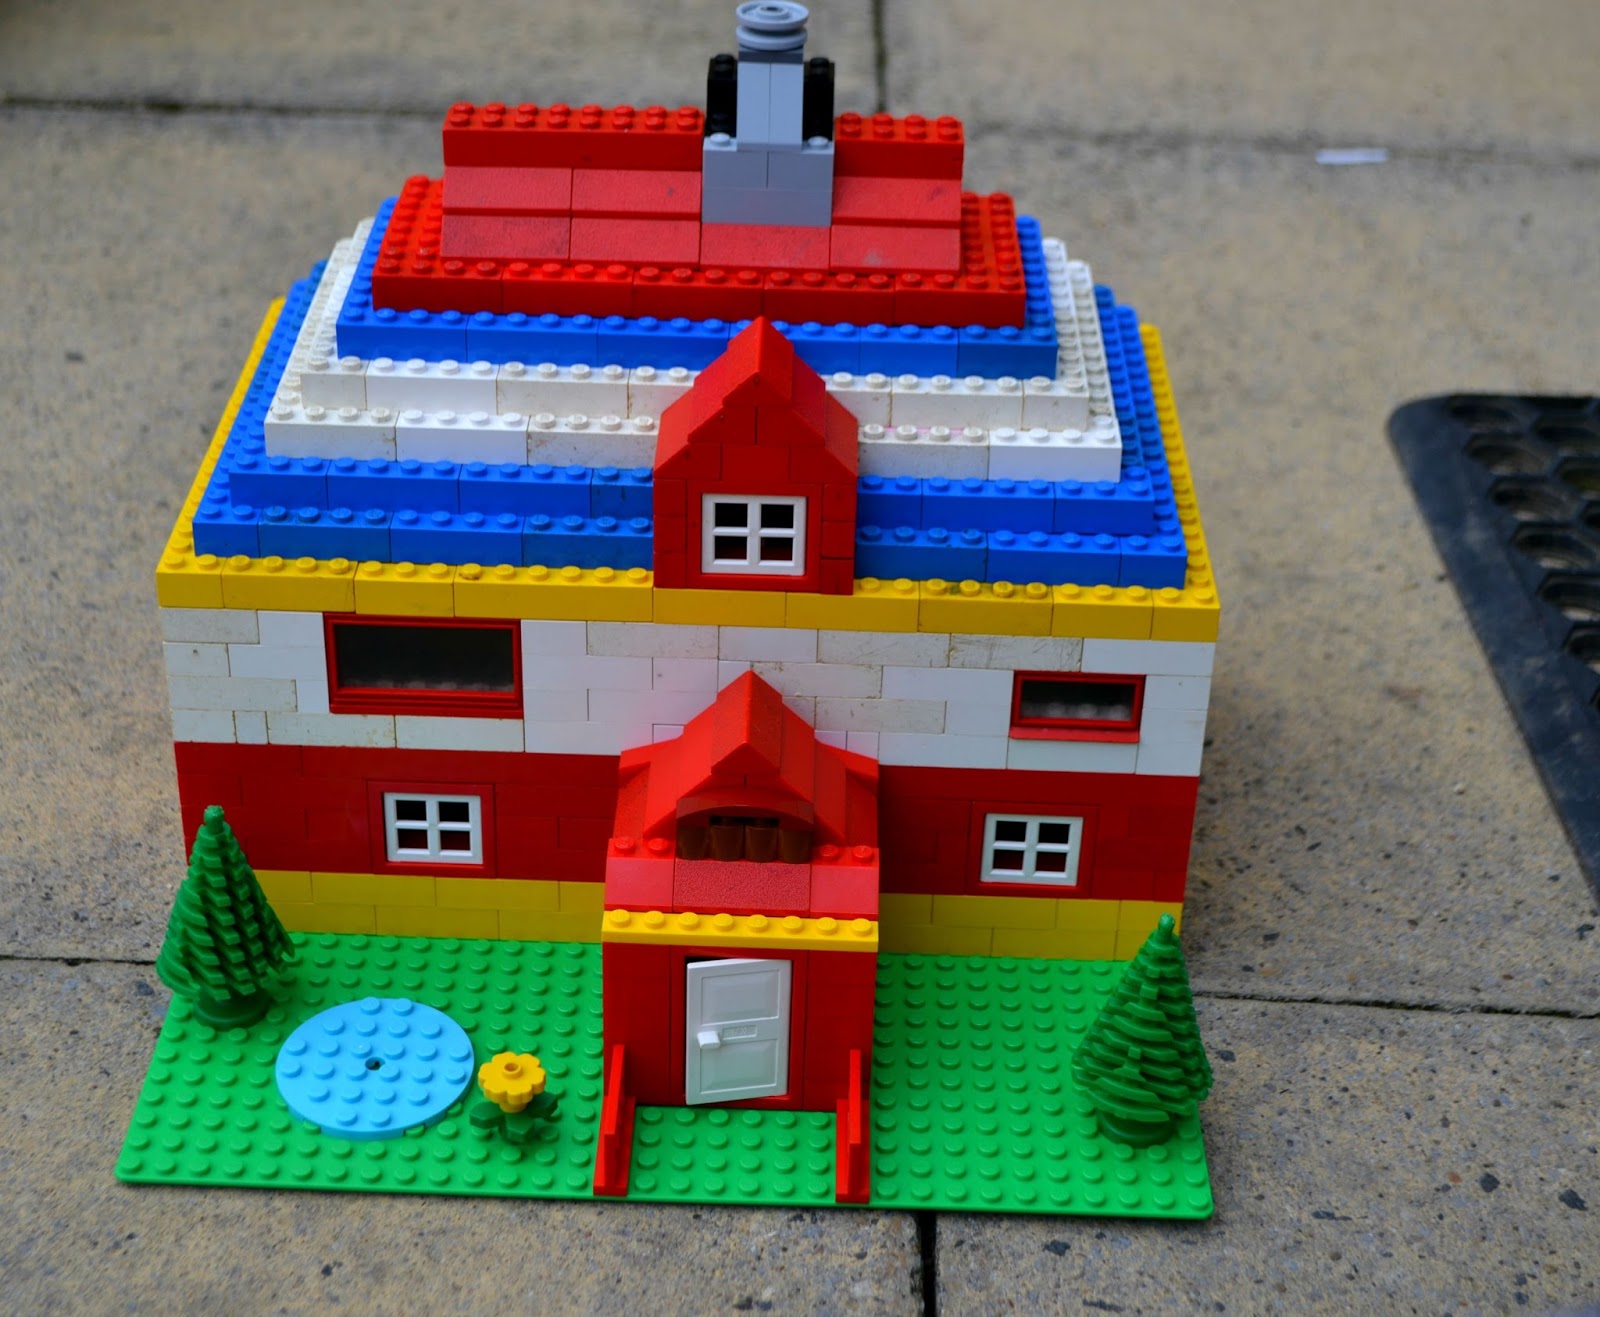 Lego dream house competition with Ocean Finance - Rock and Roll Pussycat1600 x 1317